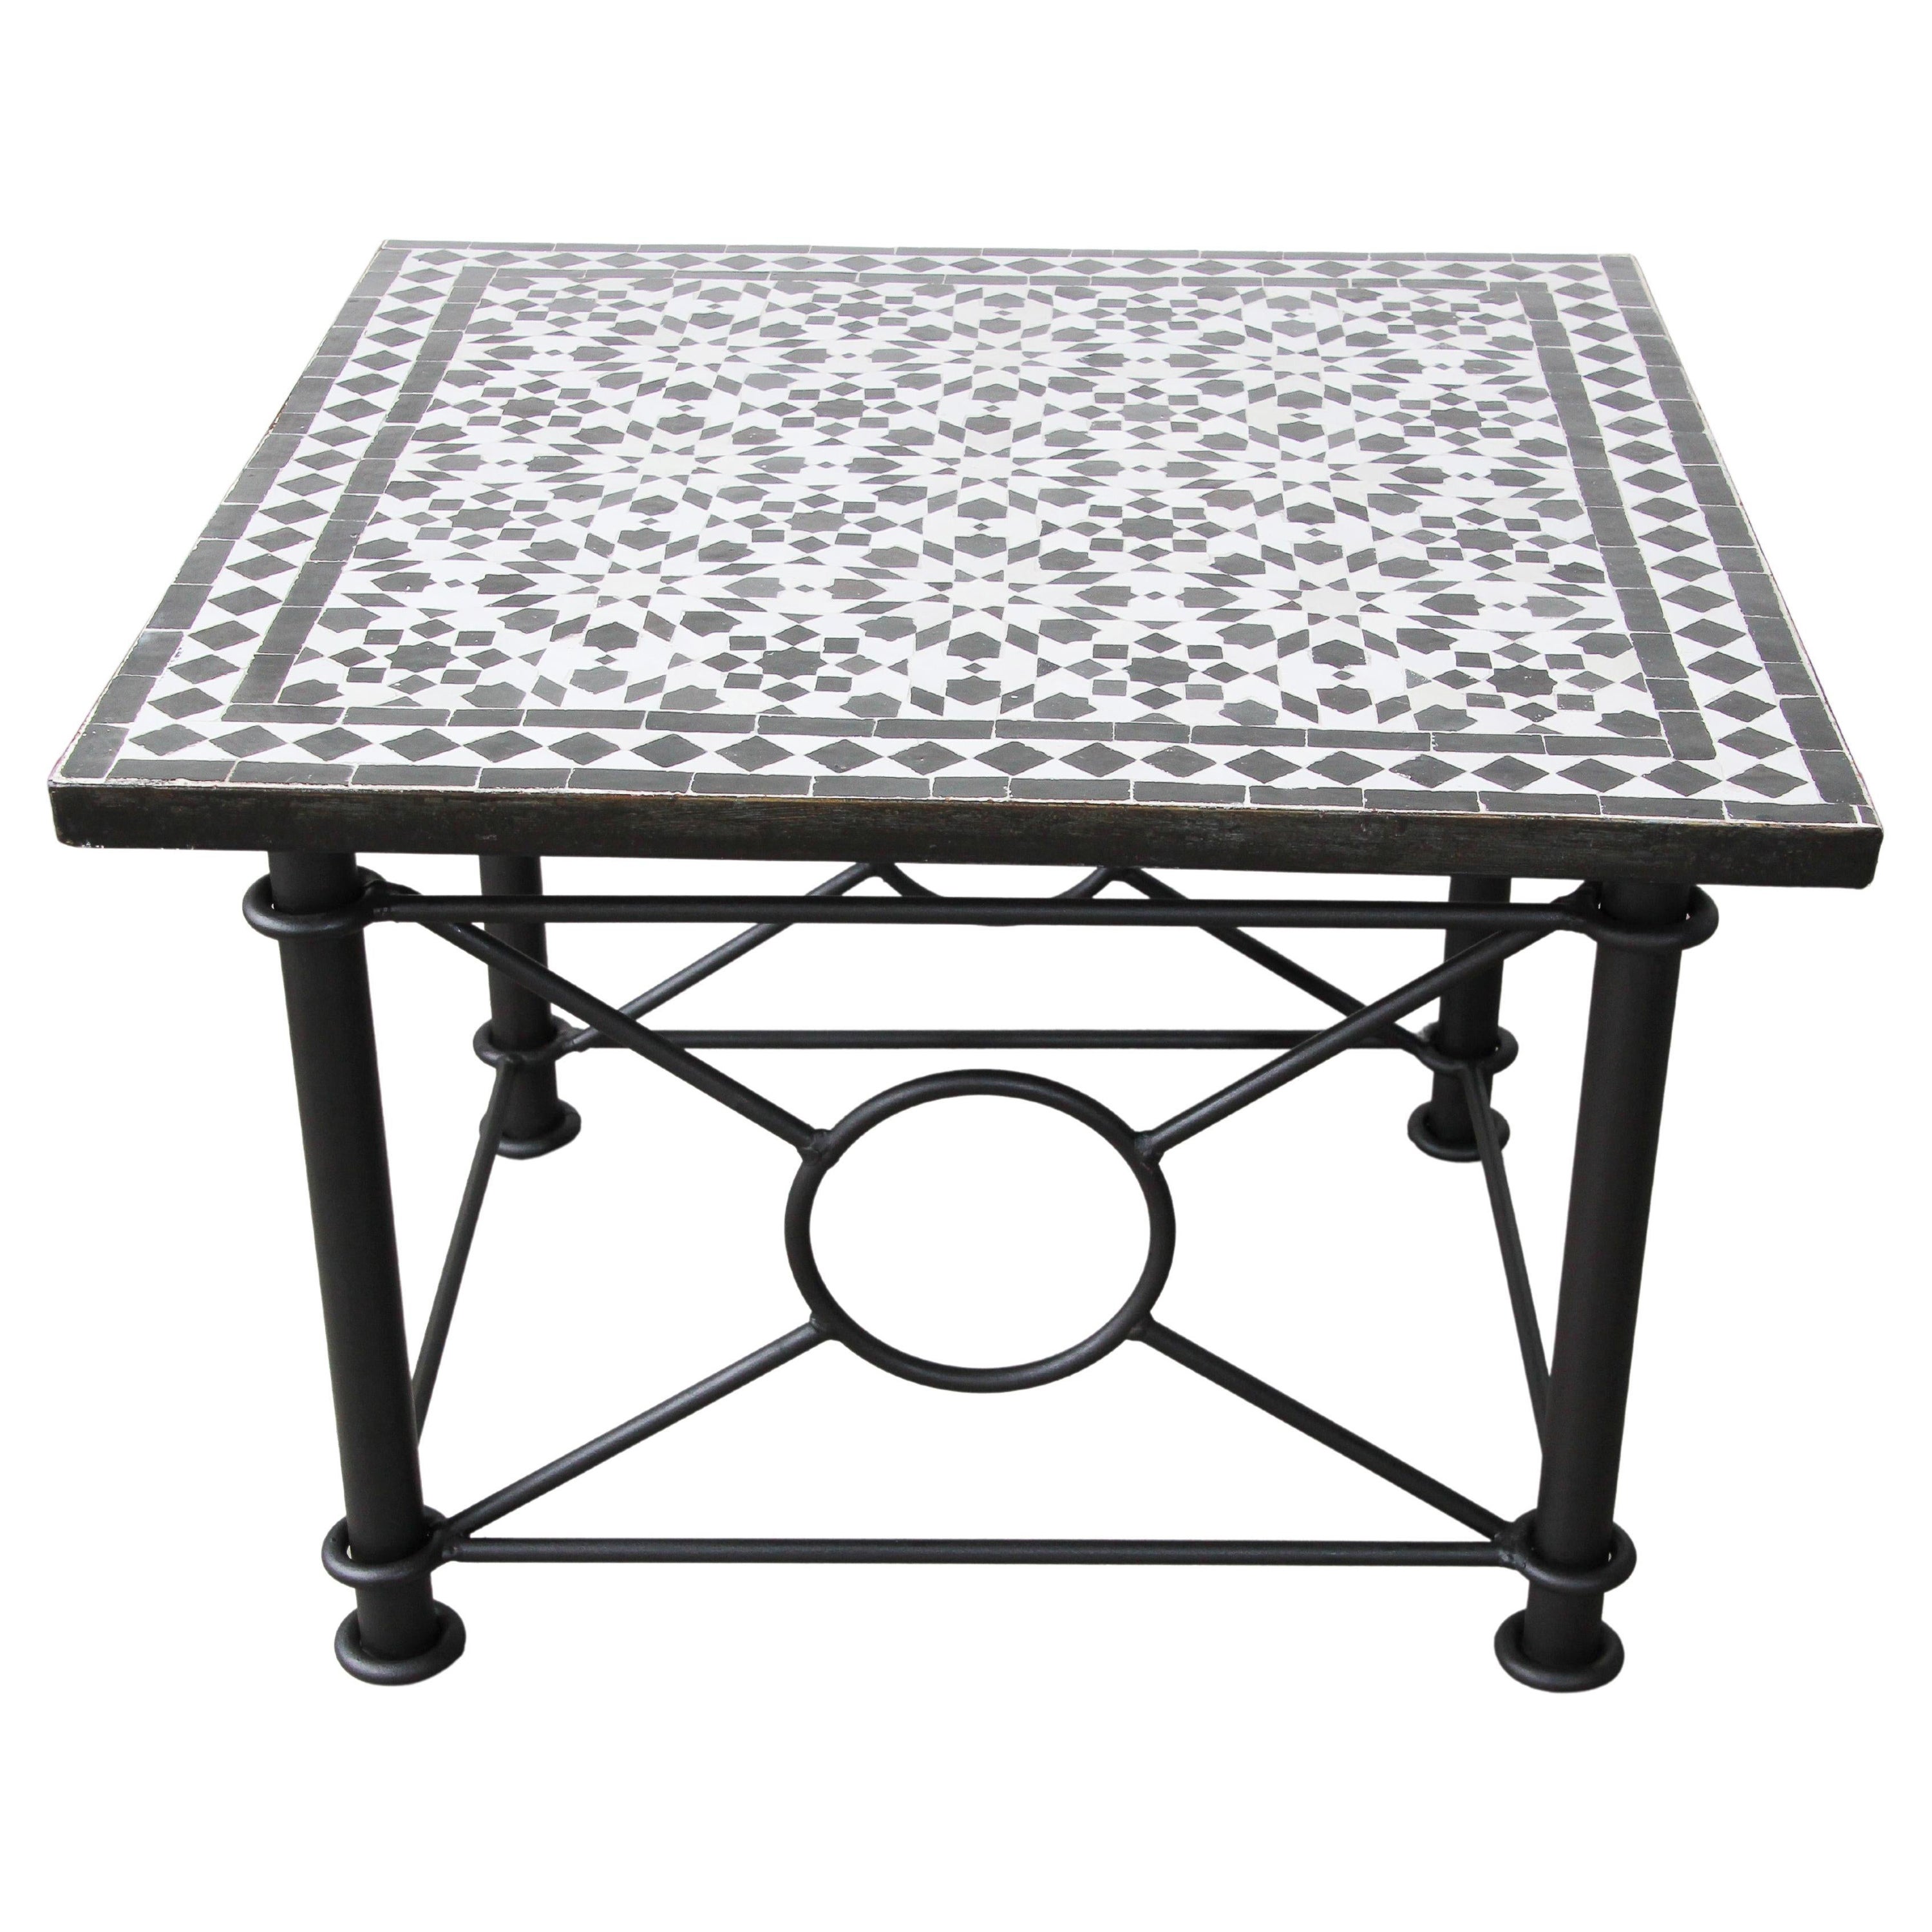 Moroccan Fez Mosaic Tile Coffee Table in Black and White For Sale